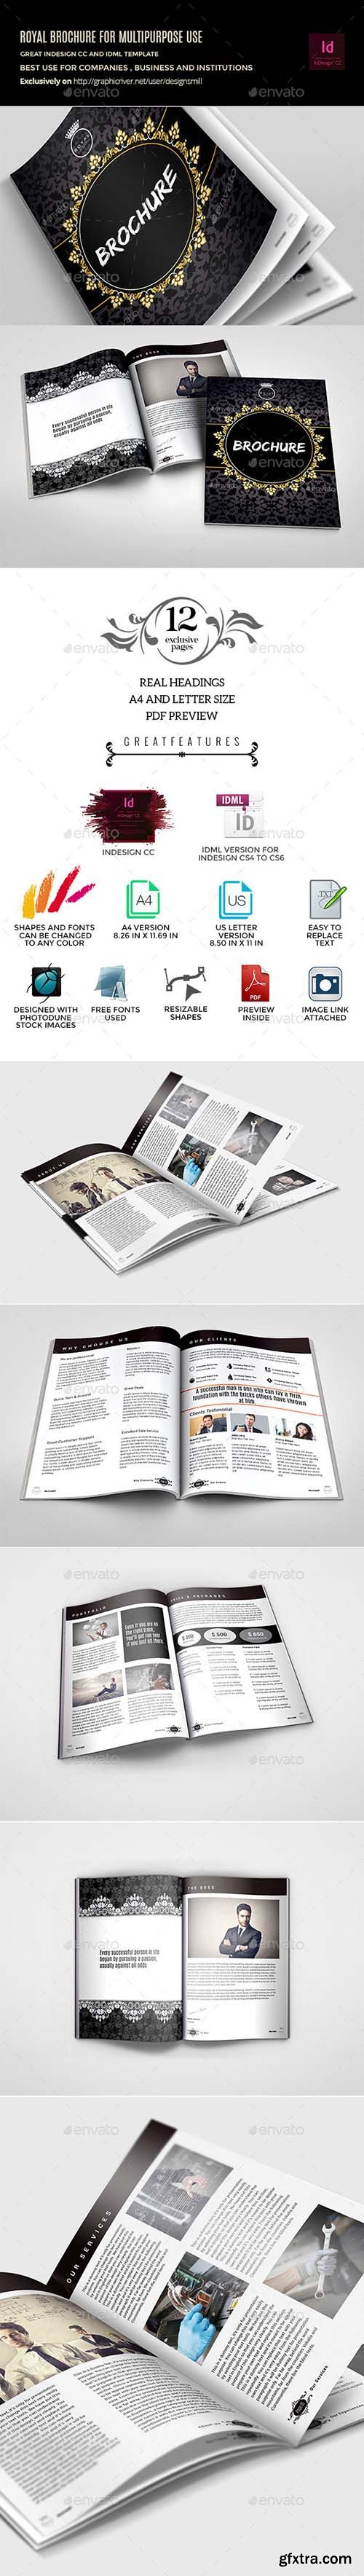 Graphicriver Royal Multipurpose Brochure Template for Business 10187119